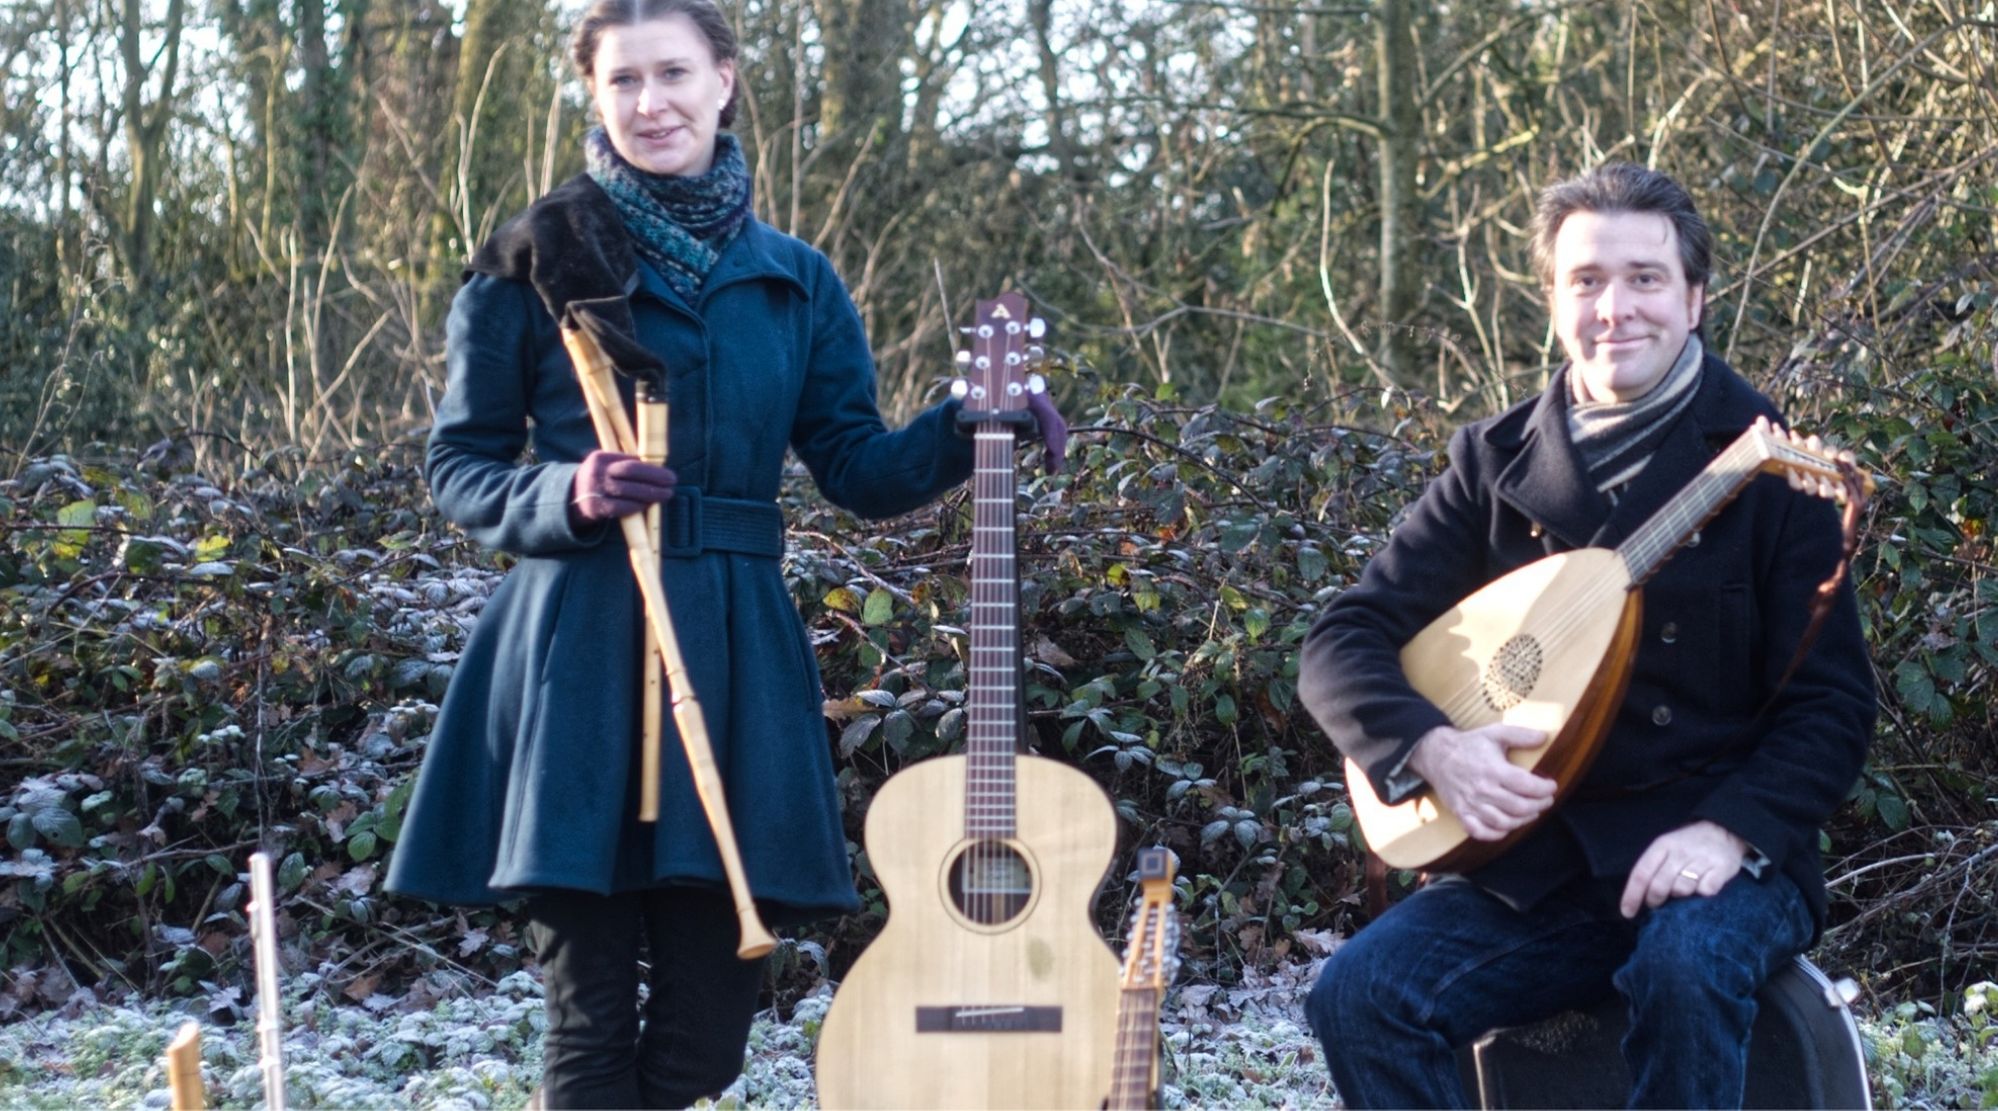 Musicians Sophie Matthews standing with a flute and guitar and Chris Green holding a mandolin in a cold wintery garden